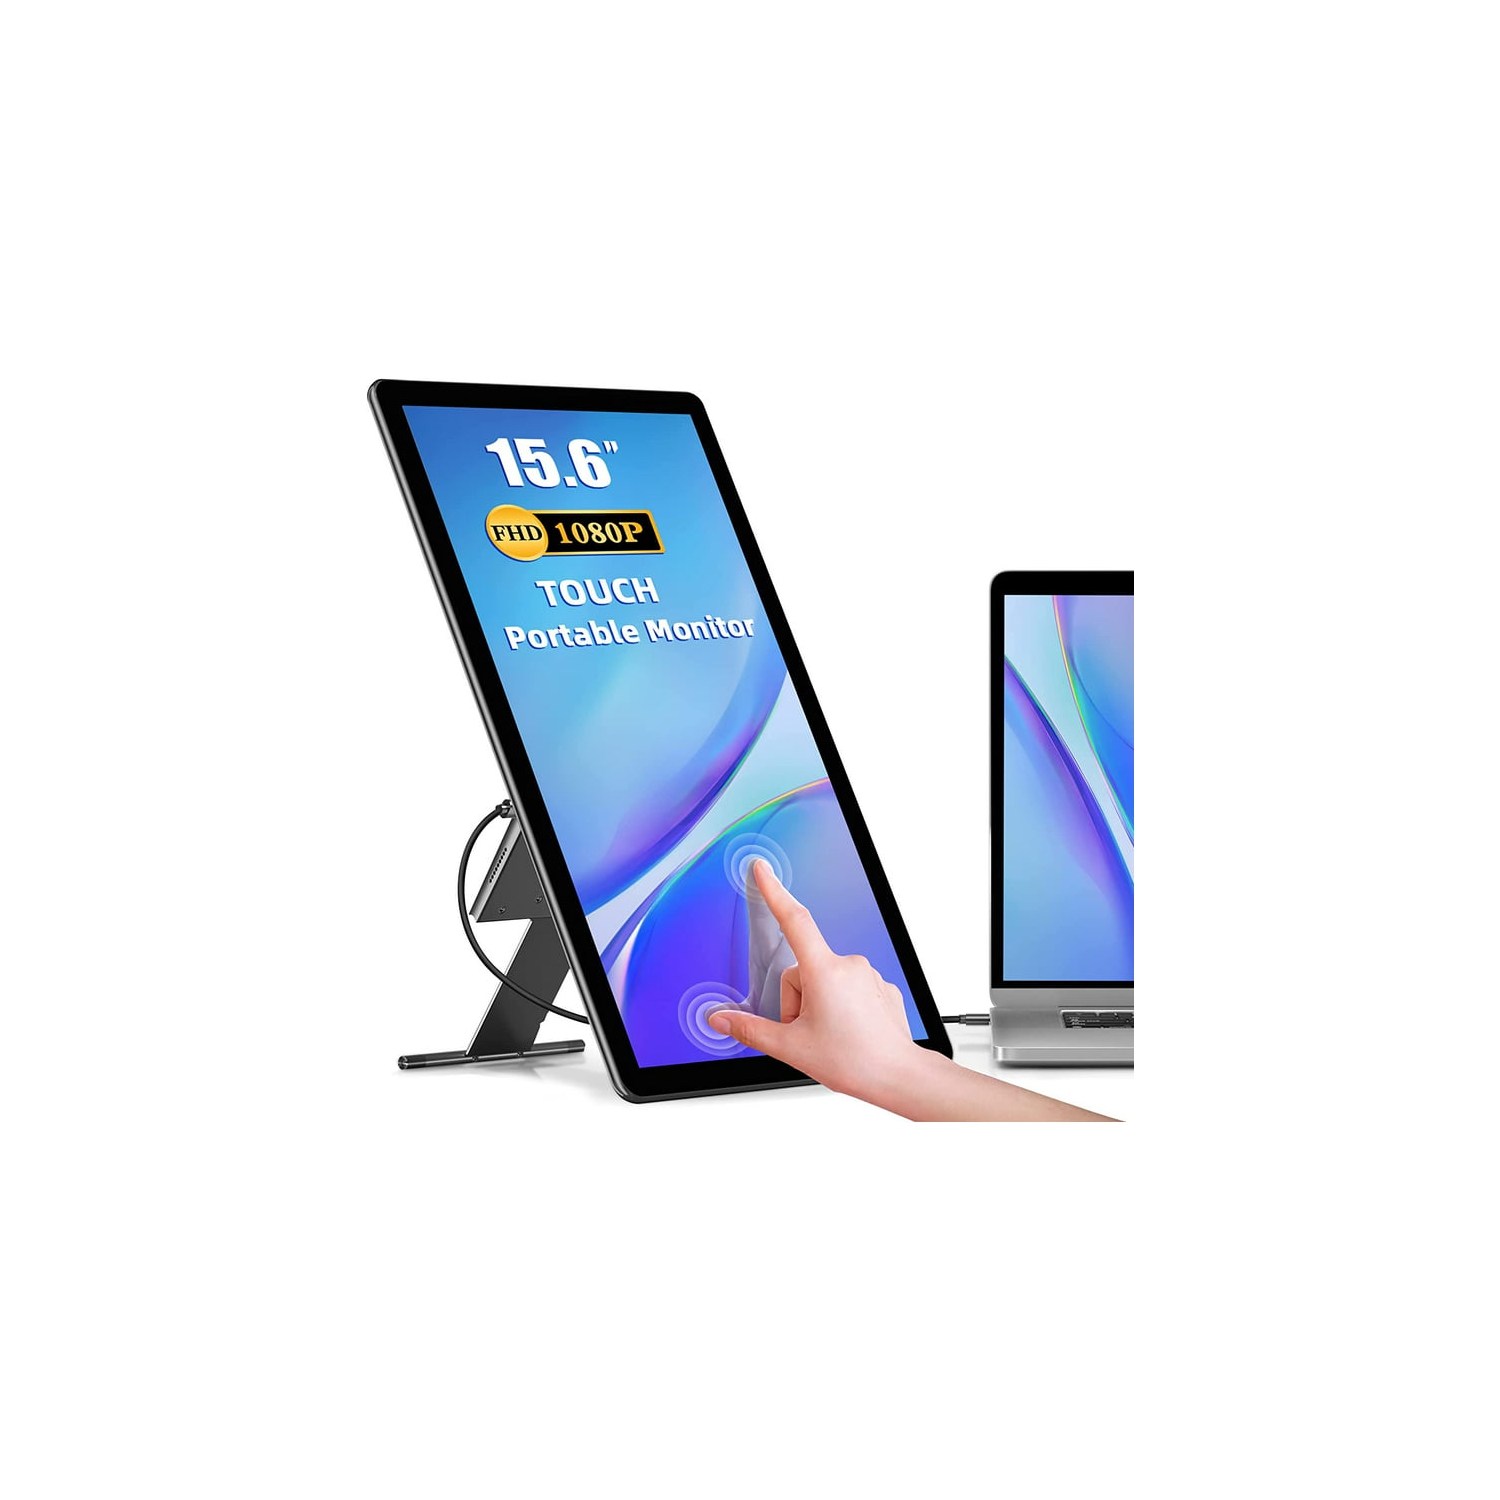 Refurbished Excellent - UPERFECT Portable Monitor Touch screen W/ Kickstand, 15.6" FHD 1080P IPS HDR TouchScreen Monitor for Laptop